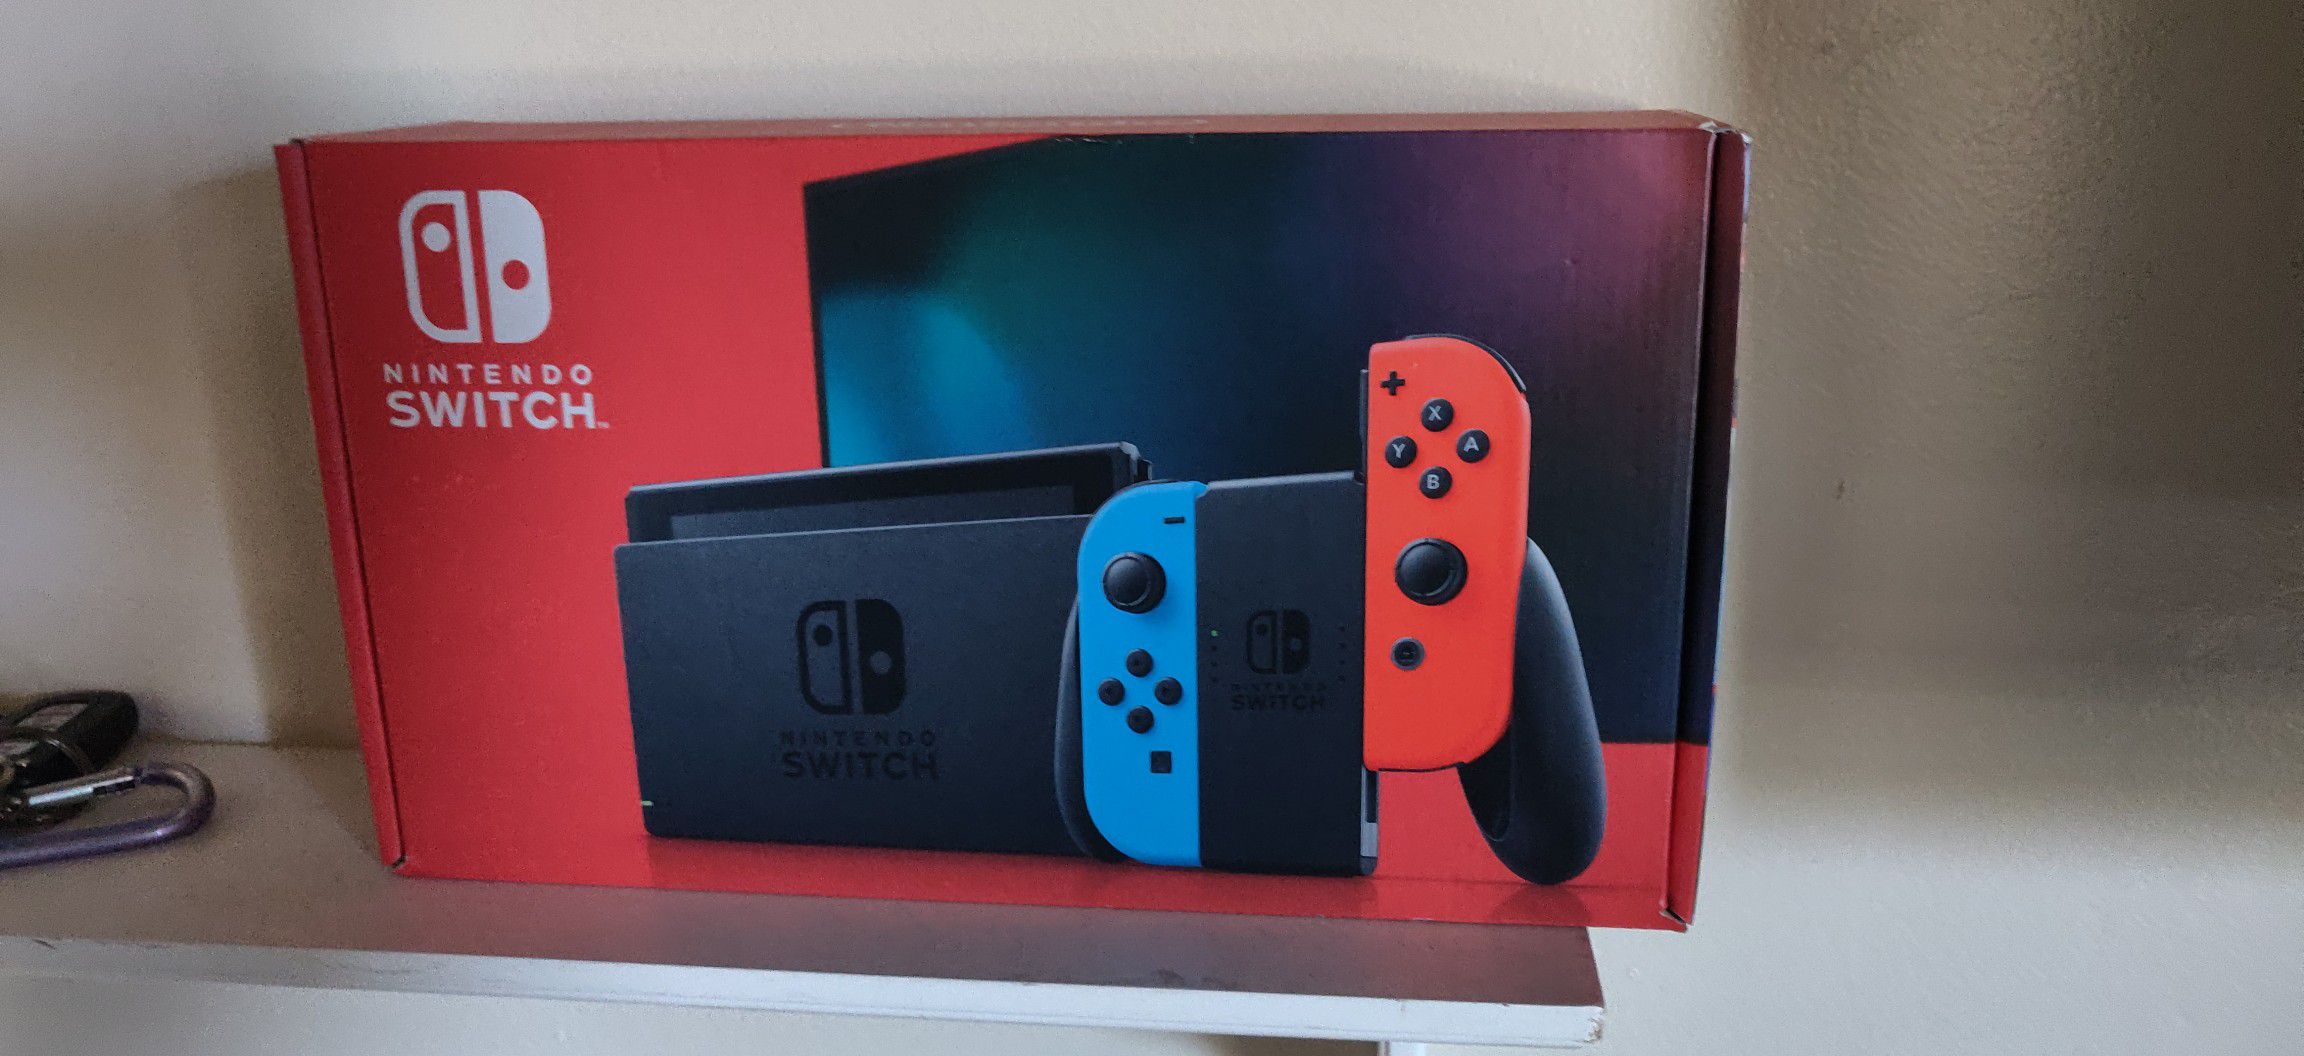 New Nintendo Switch V2 Neon Blue and Red